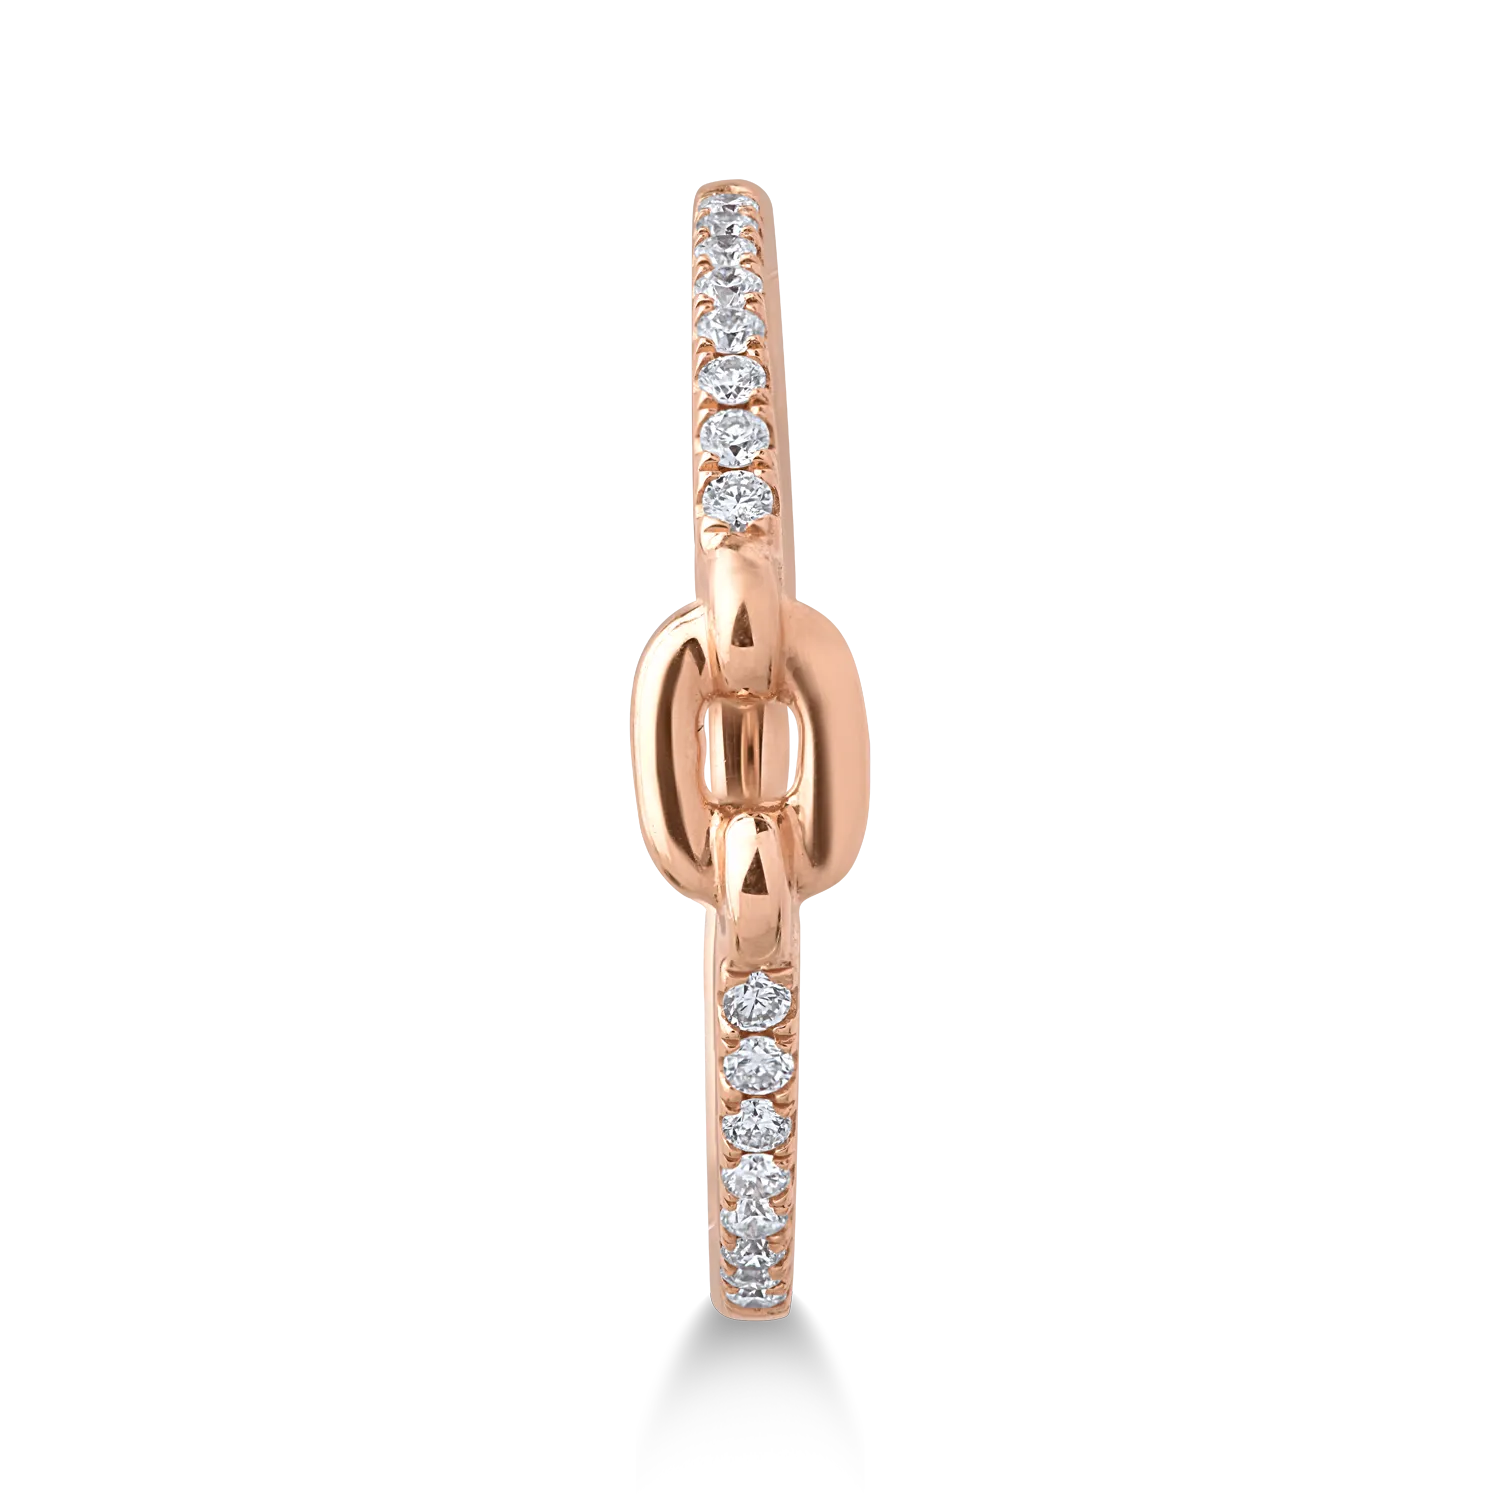 Rose gold ring with 0.10ct diamonds